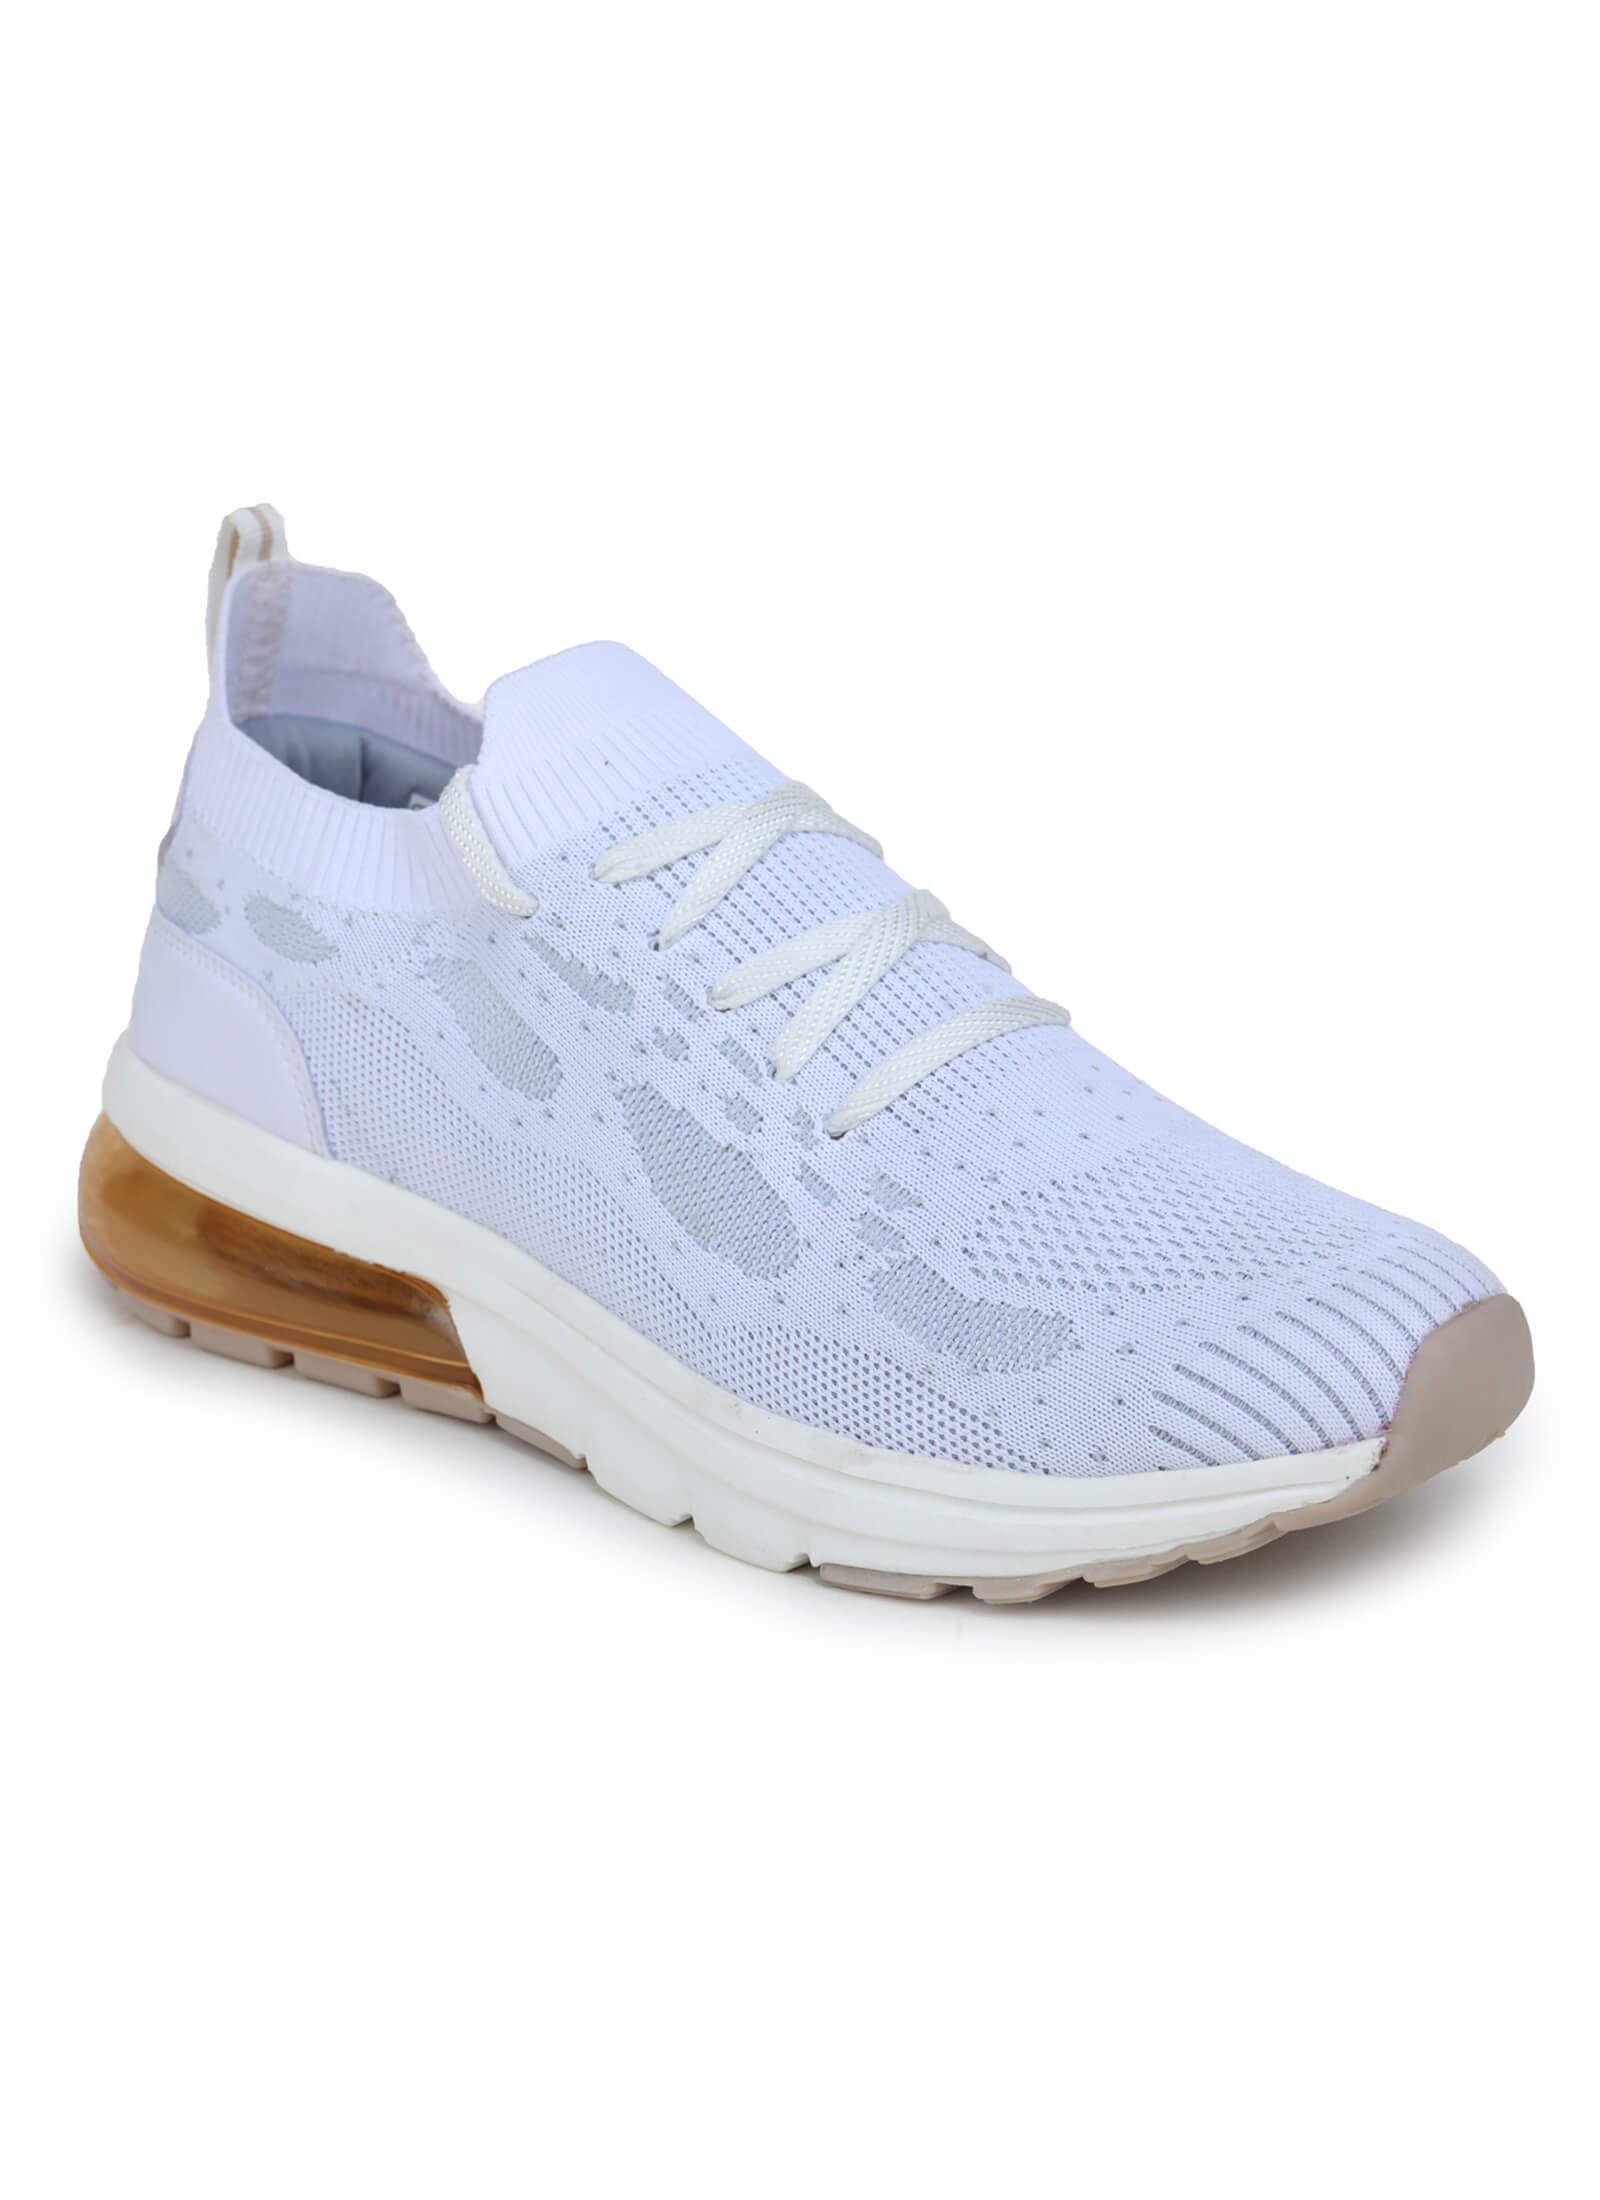 Bairstow-2 Anti-Skid Sports Shoes For Men